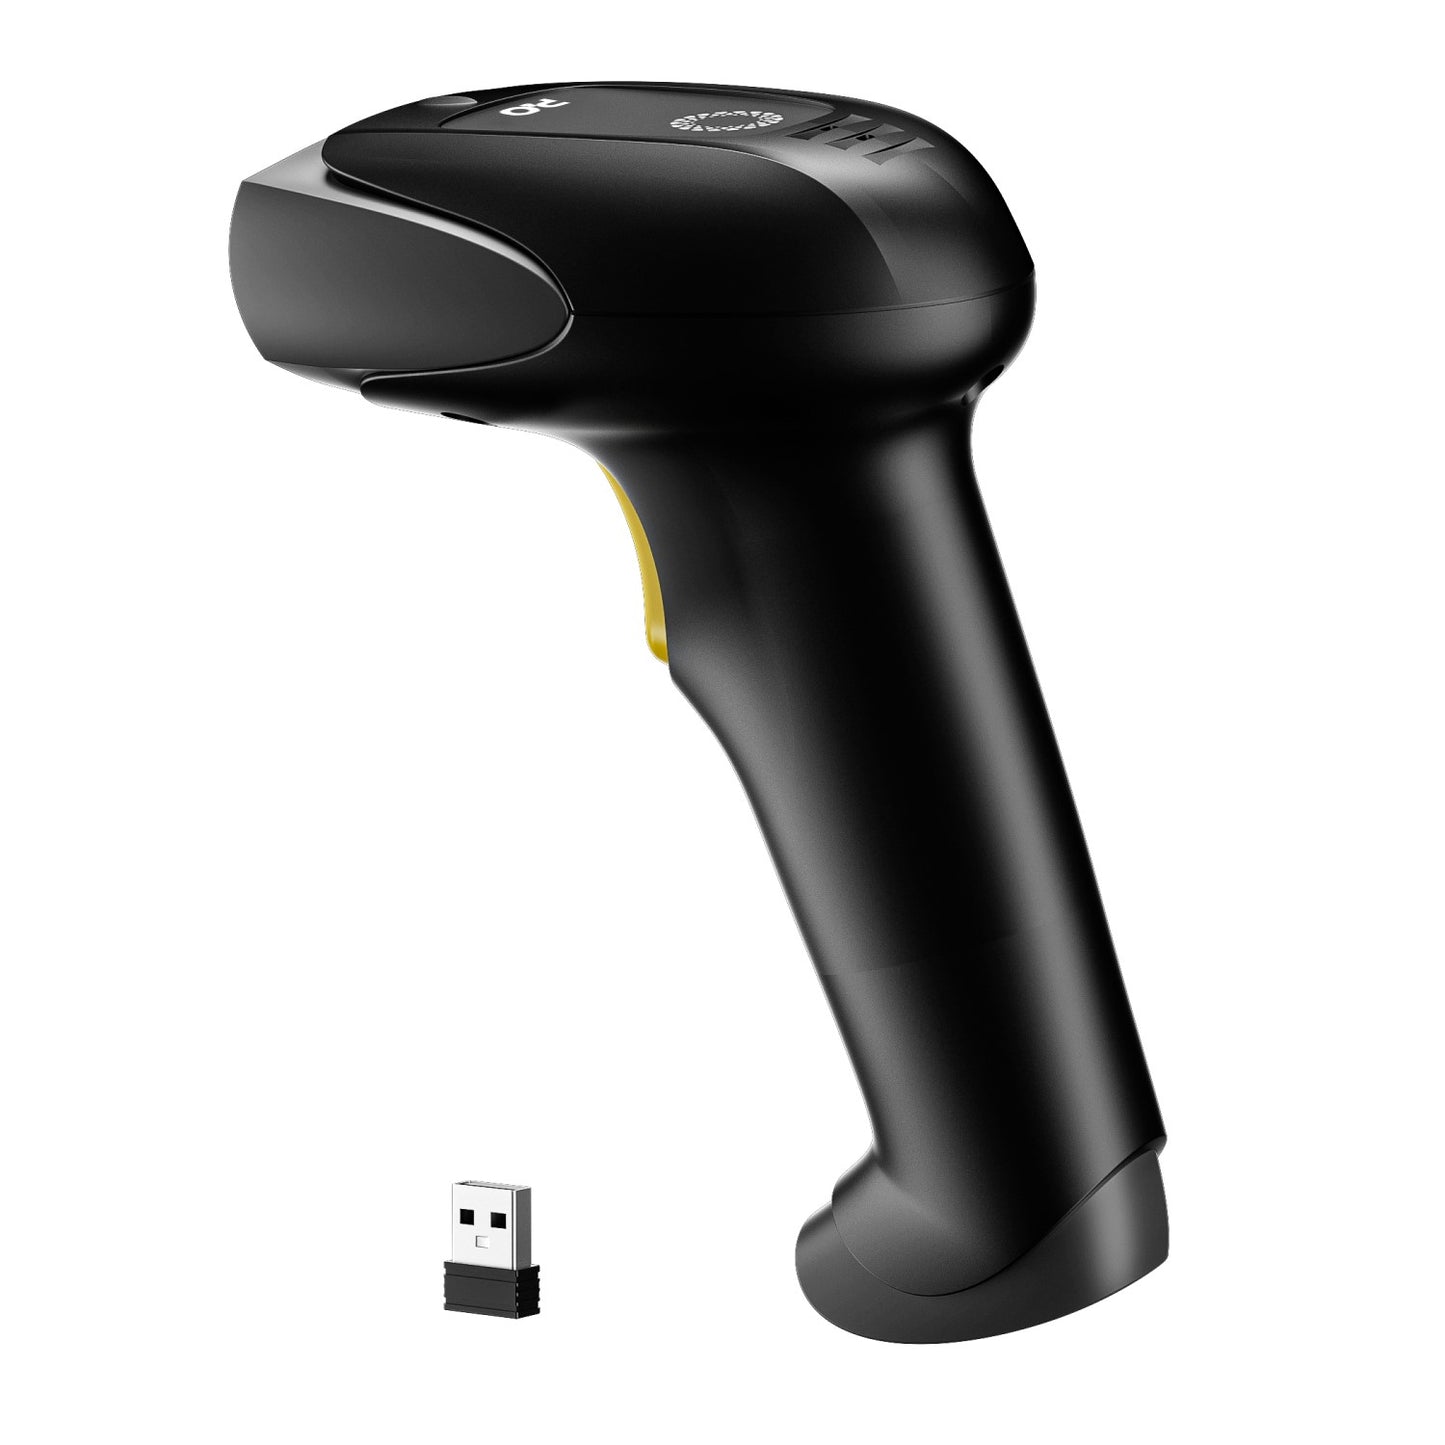 Imager 2D barcode scanner, wireless with USB dongle BS144